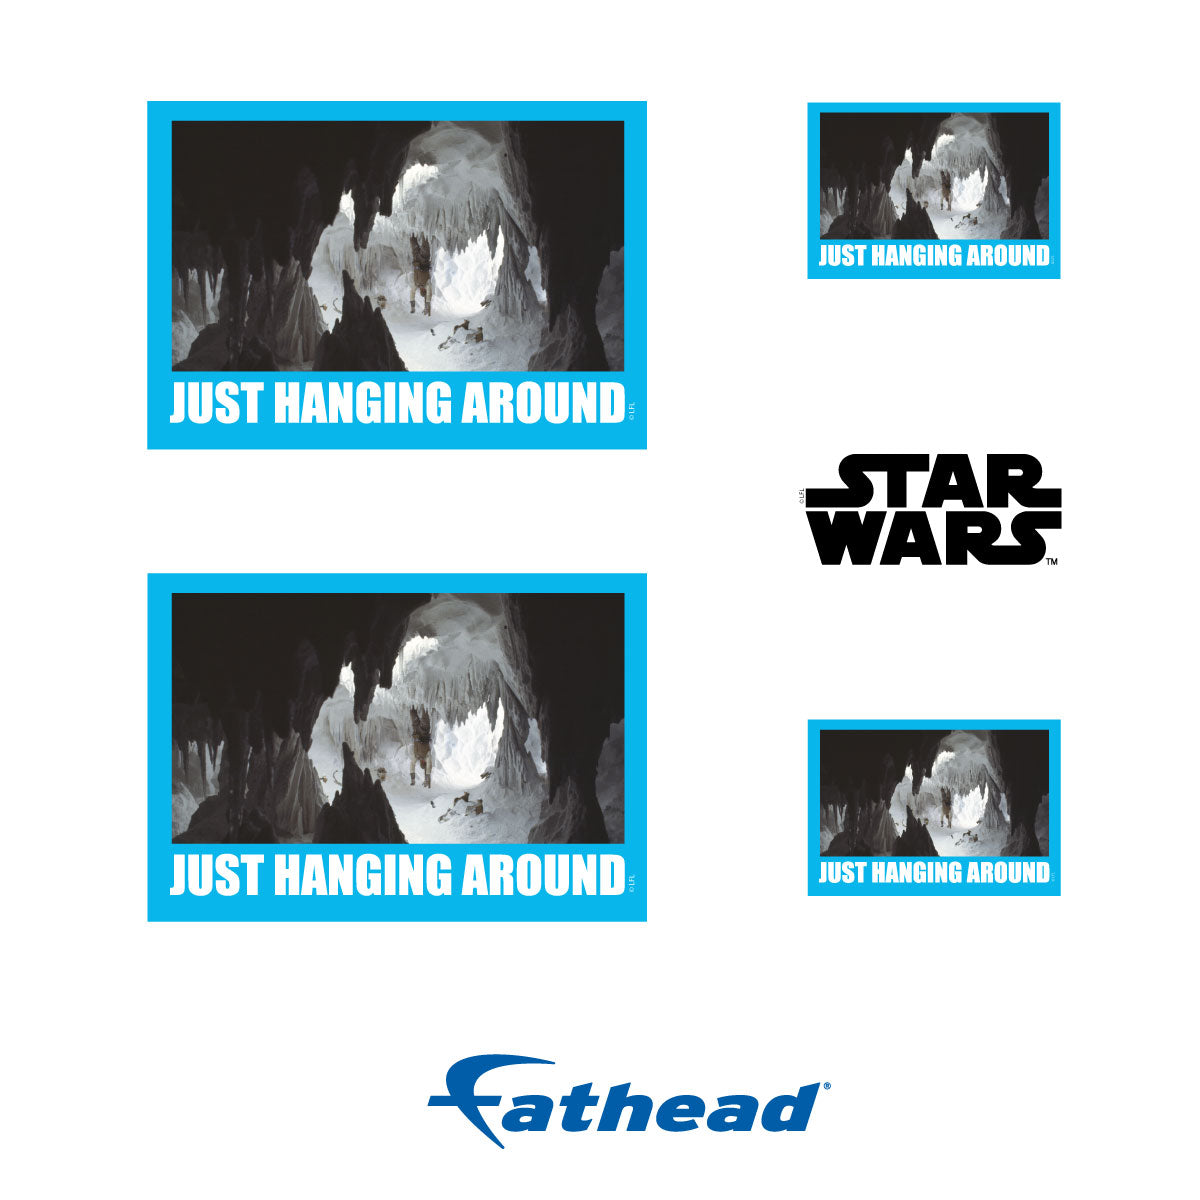 Just Hanging Around meme Minis        - Officially Licensed Star Wars Removable     Adhesive Decal